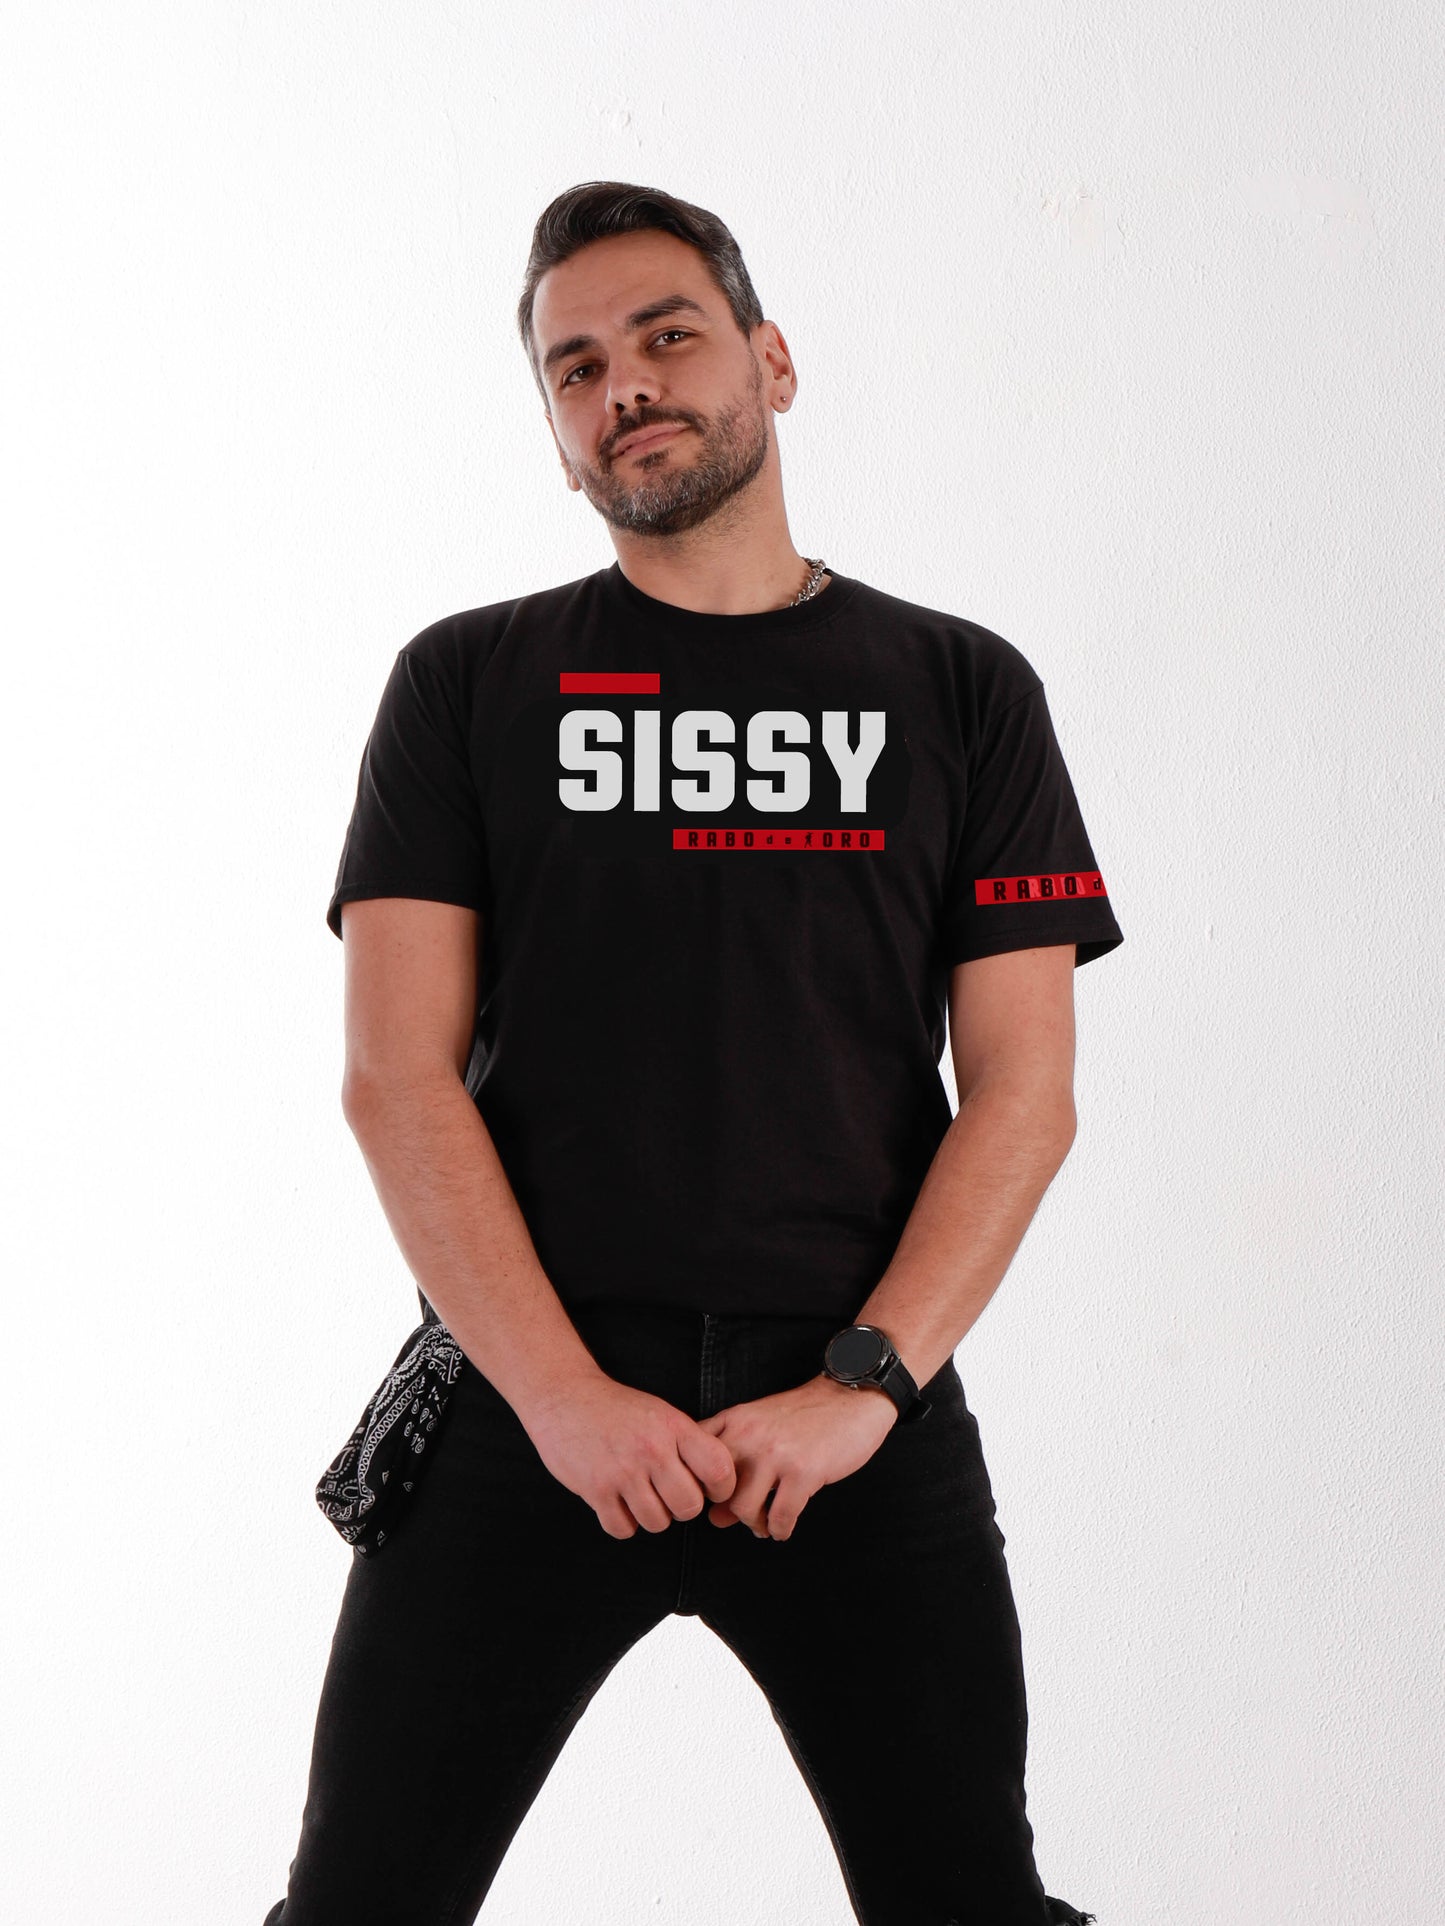 SISSY Black T-Shirt with BDSM Hanky Code details